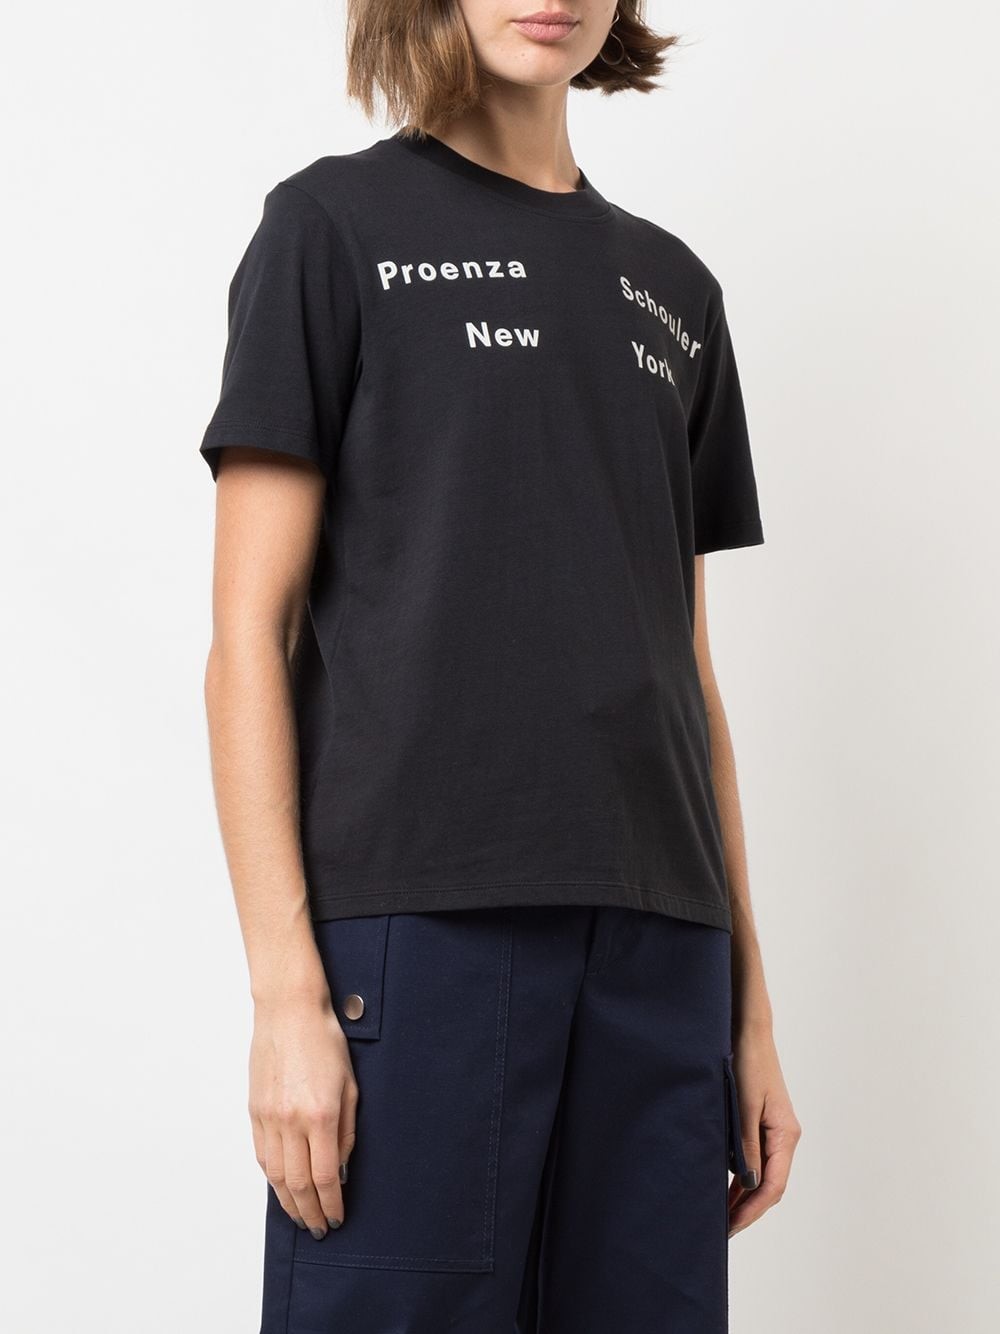 proenza schouler PRINTED T-SHIRT available on montiboutique.com - 33657